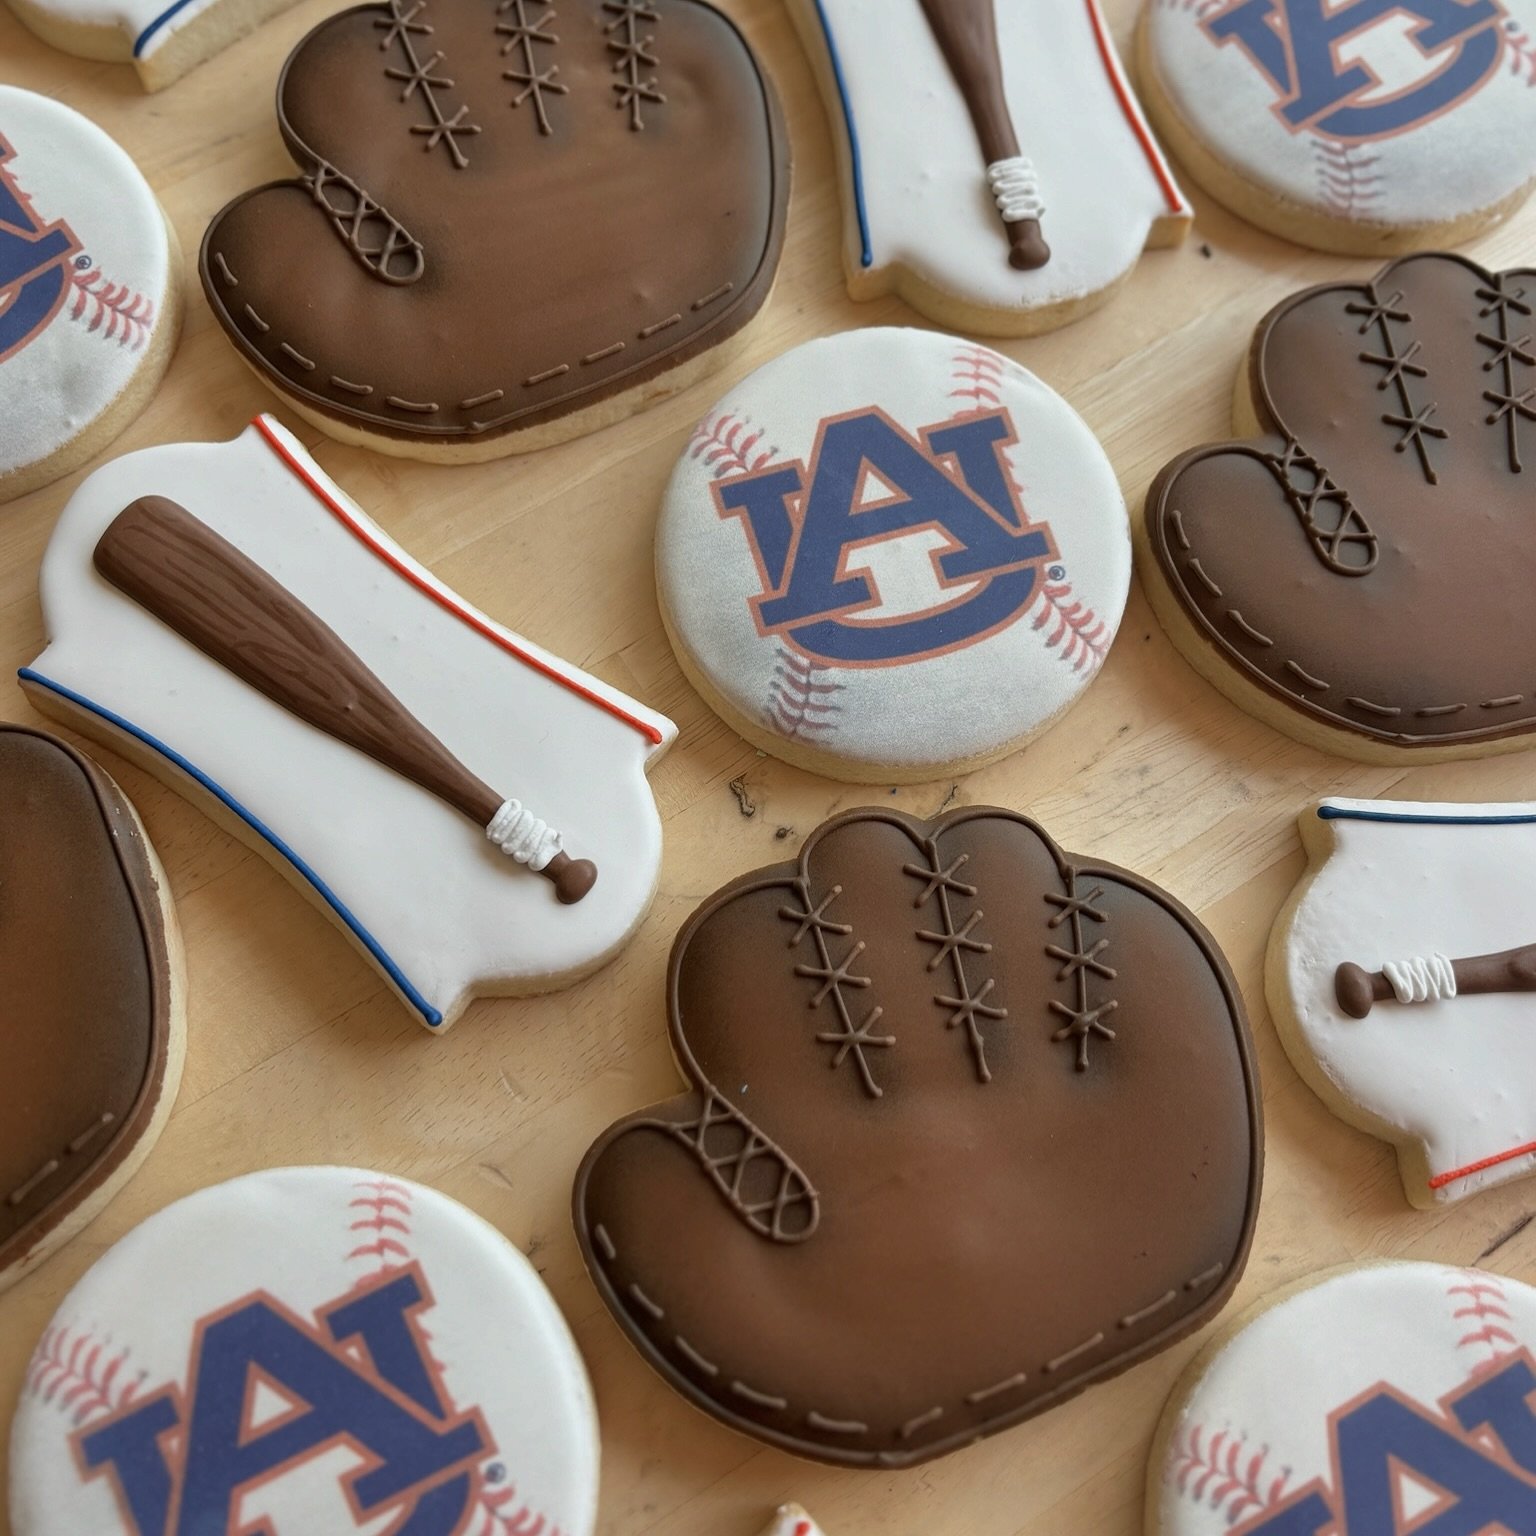 Batter Up! These cookies are sweeter than a home run ⚾️🍪 #cakeitecture #auburn #aubie #cookies #baseball